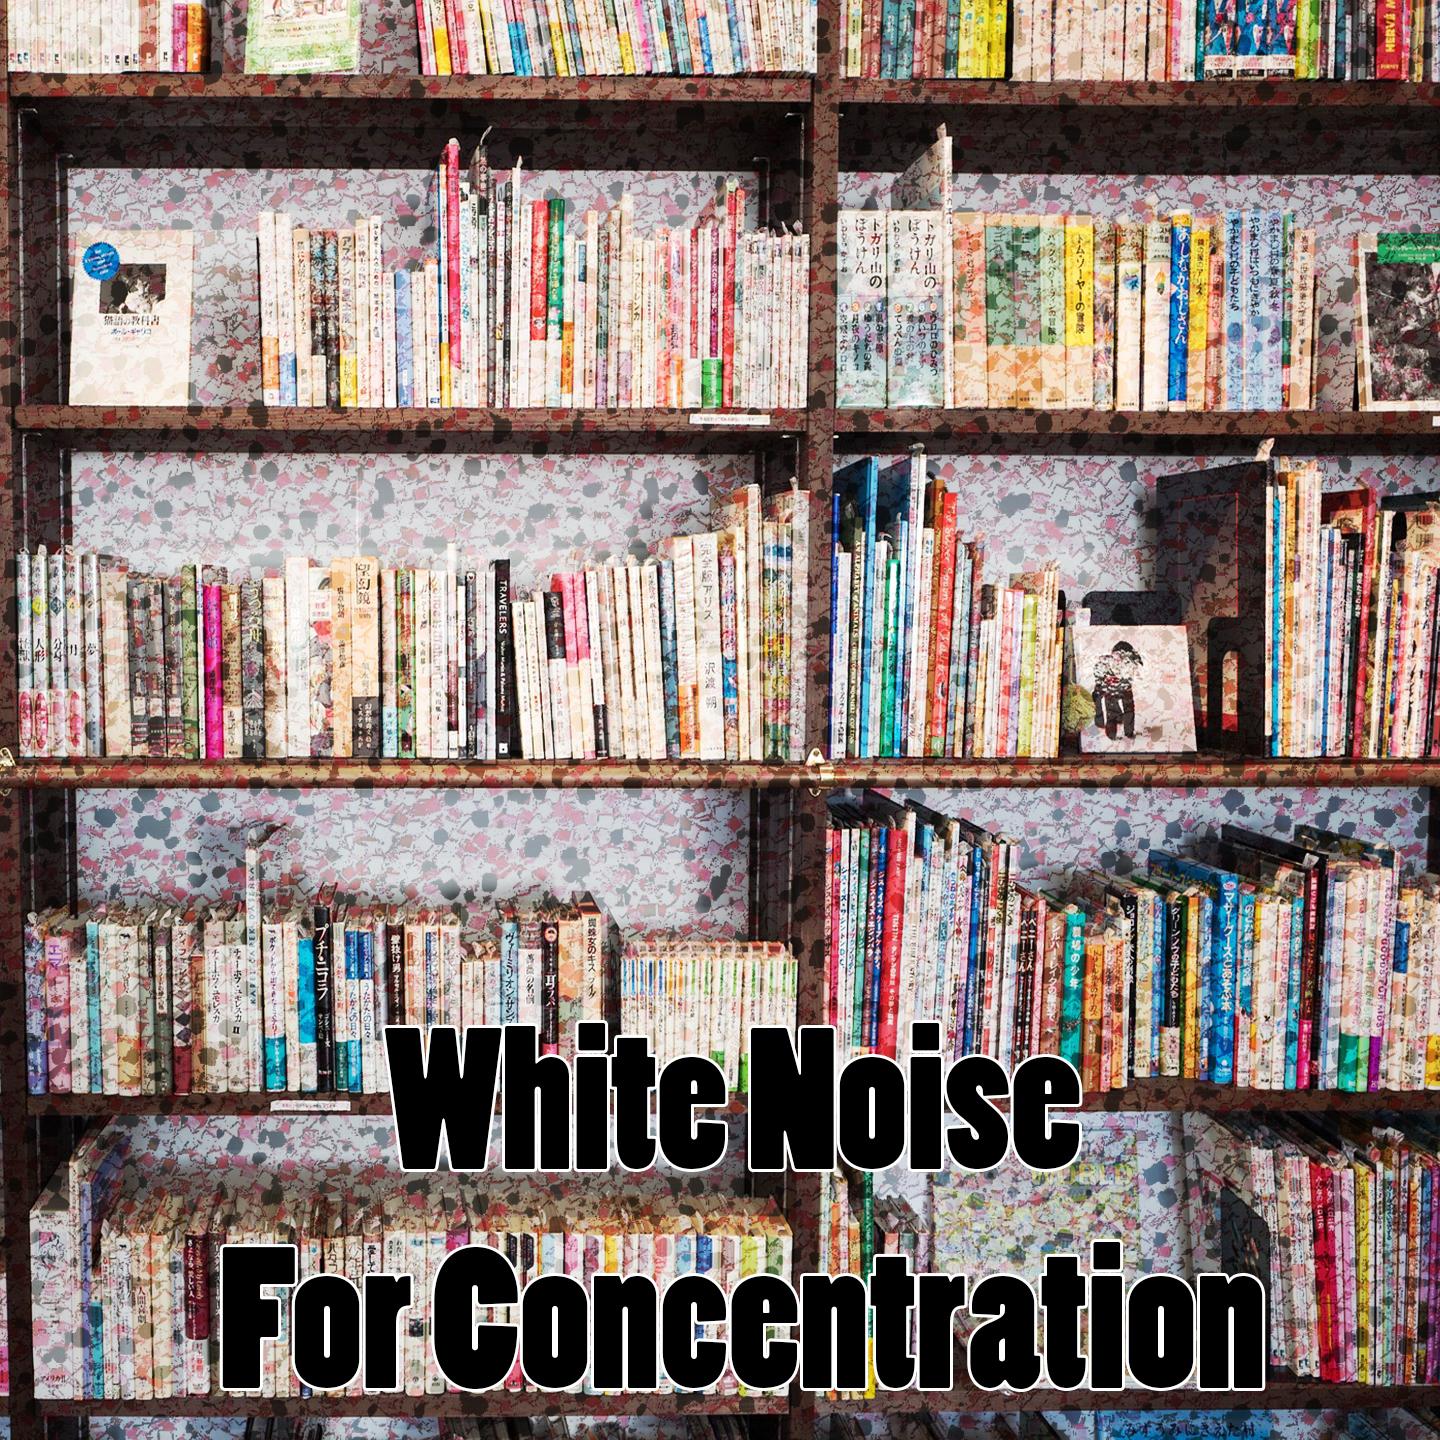 White Noise For Concentration